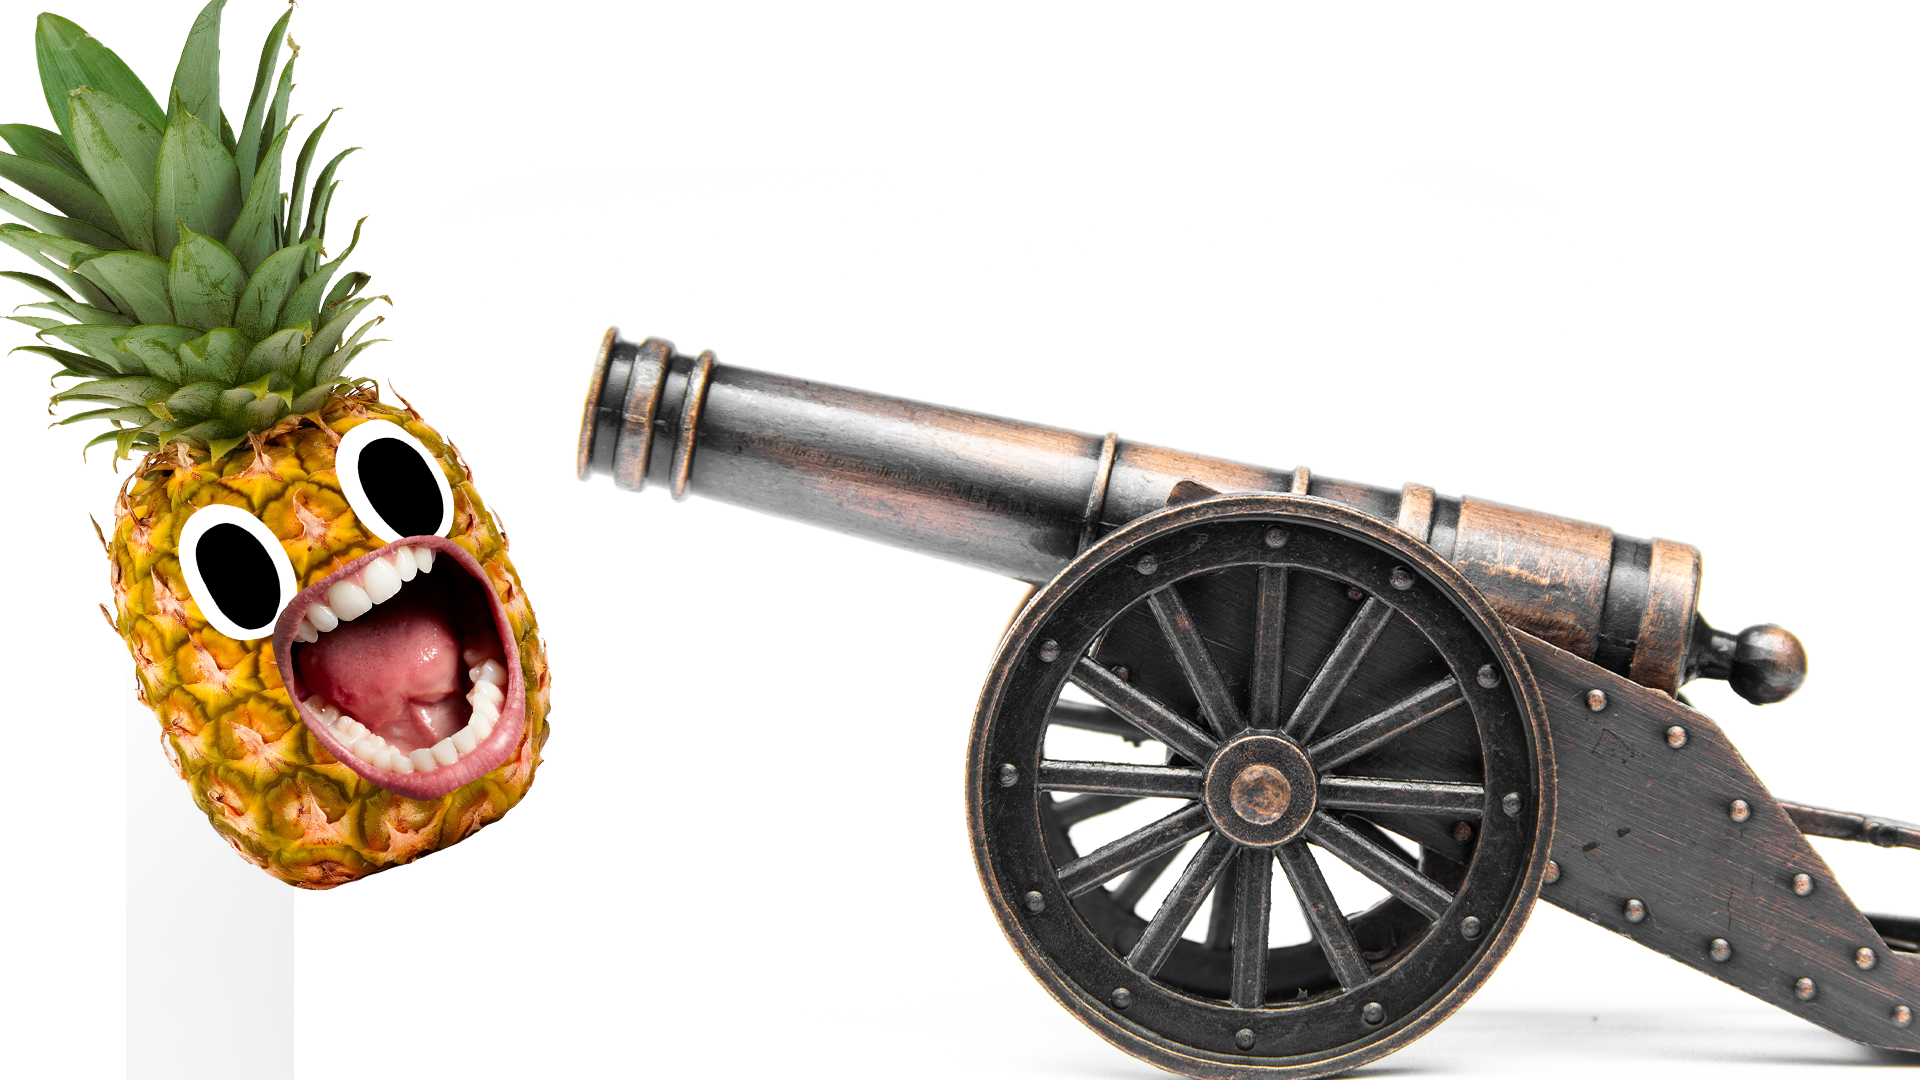 Cannon and screaming pineapple on white background